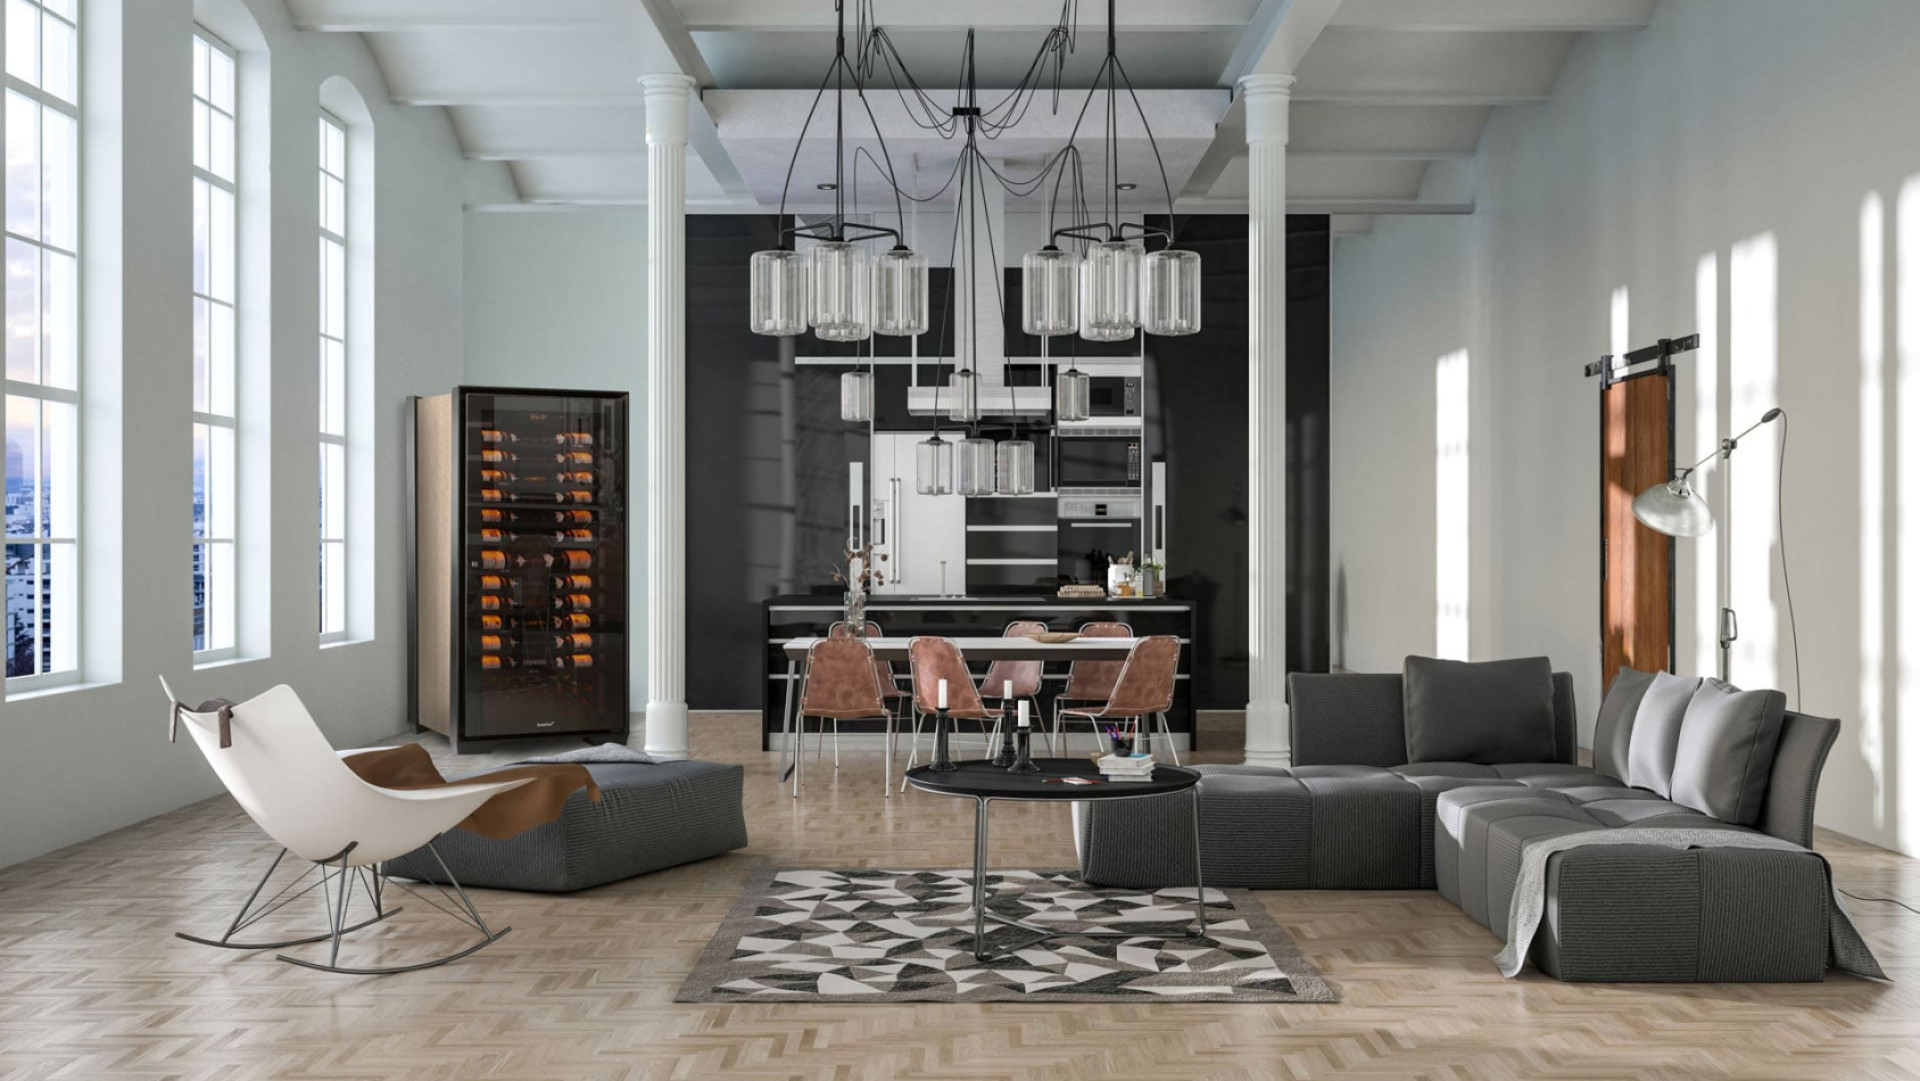 The best aging wine cabinet in the world installed in an apartment with character, modern plateau, with elegant designer furniture. - Royale EuroCave